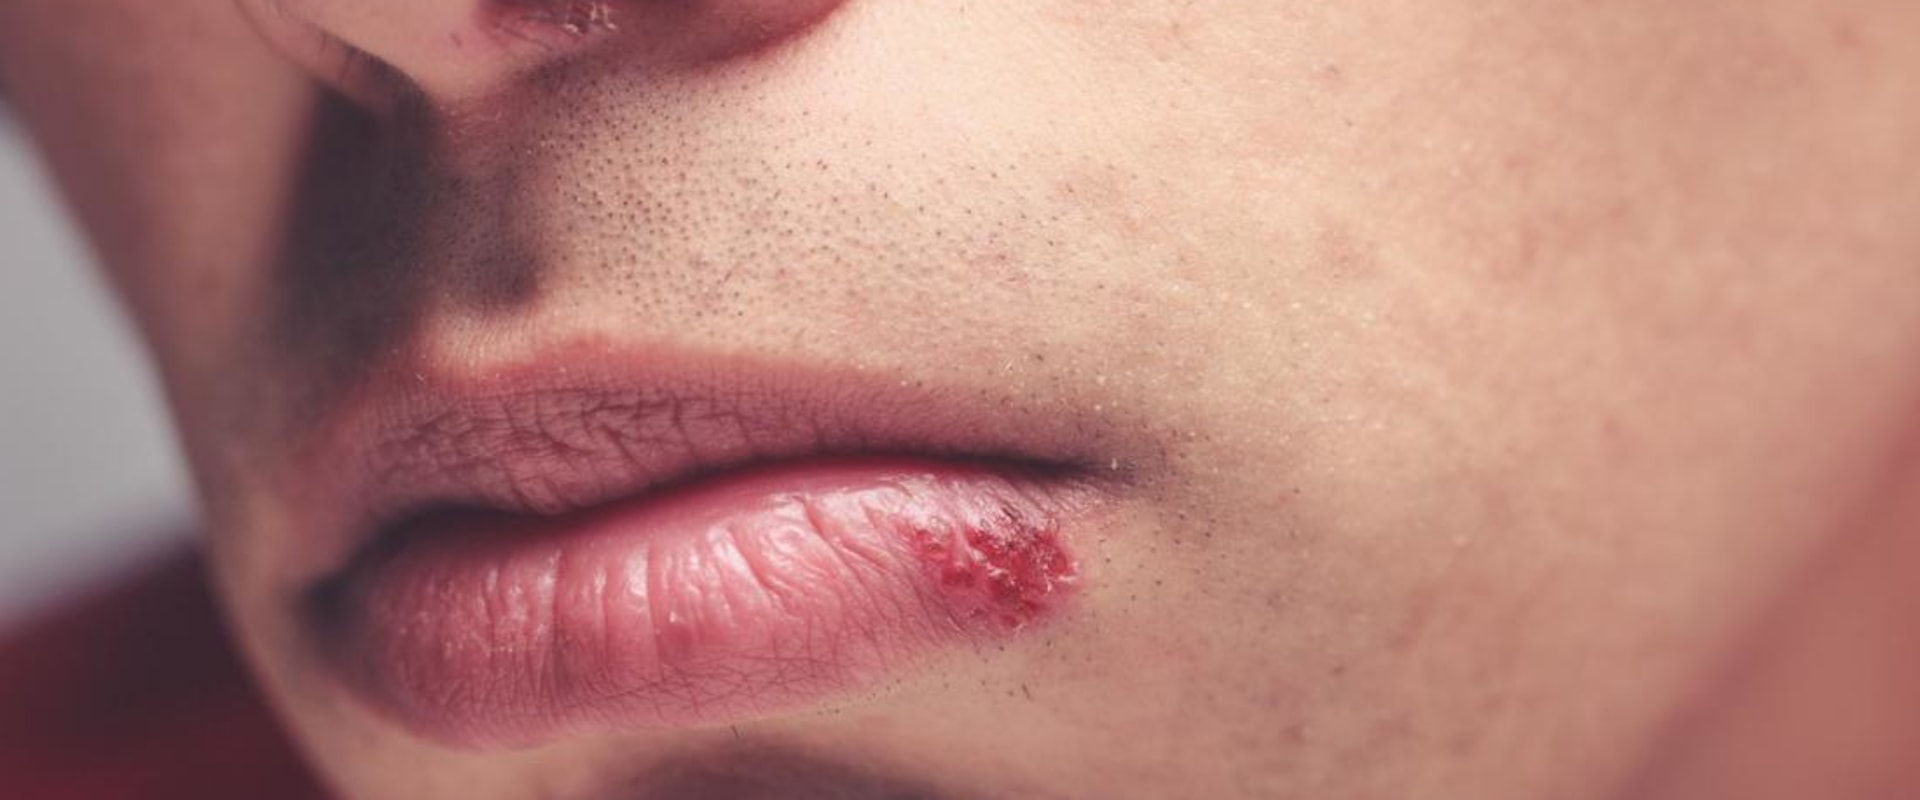 Aromatherapy for Treating Herpes Lips: An Overview